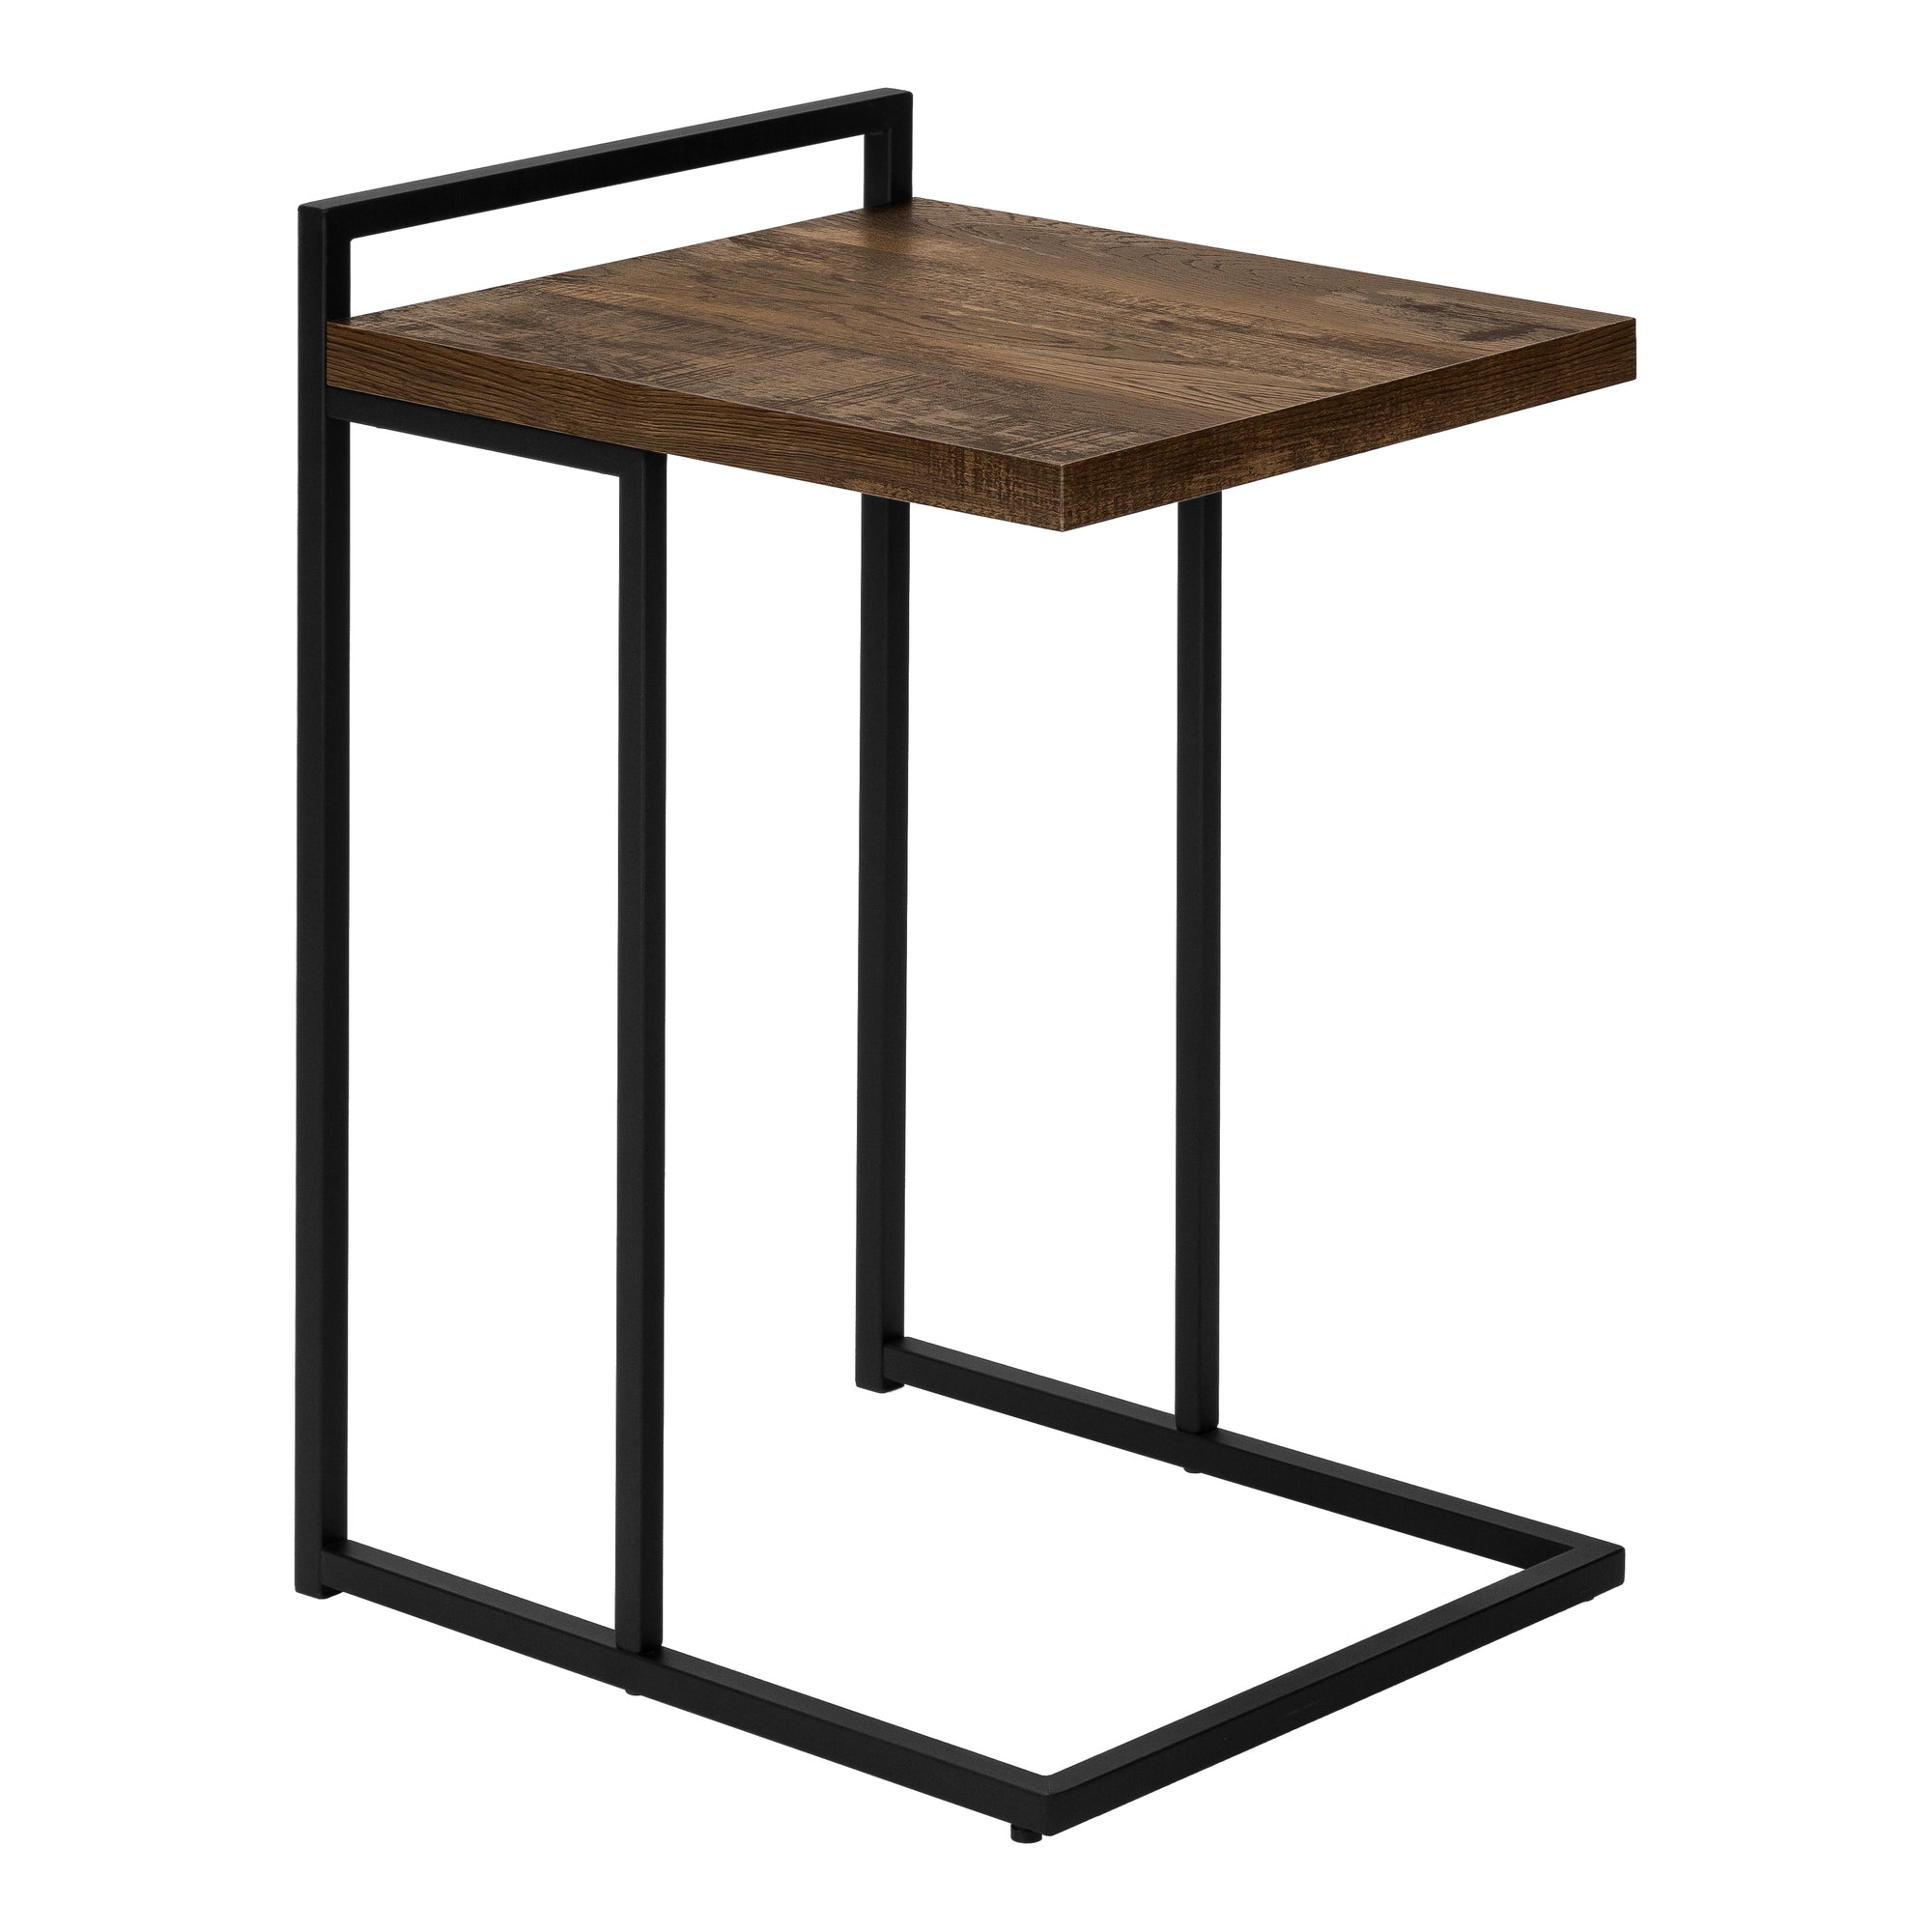 MN-793630    Accent Table, C-Shaped, End, Side, Snack, Living Room, Bedroom, Metal Frame, Laminate, Brown Reclaimed Wood Look, Black, Contemporary, Industrial, Modern